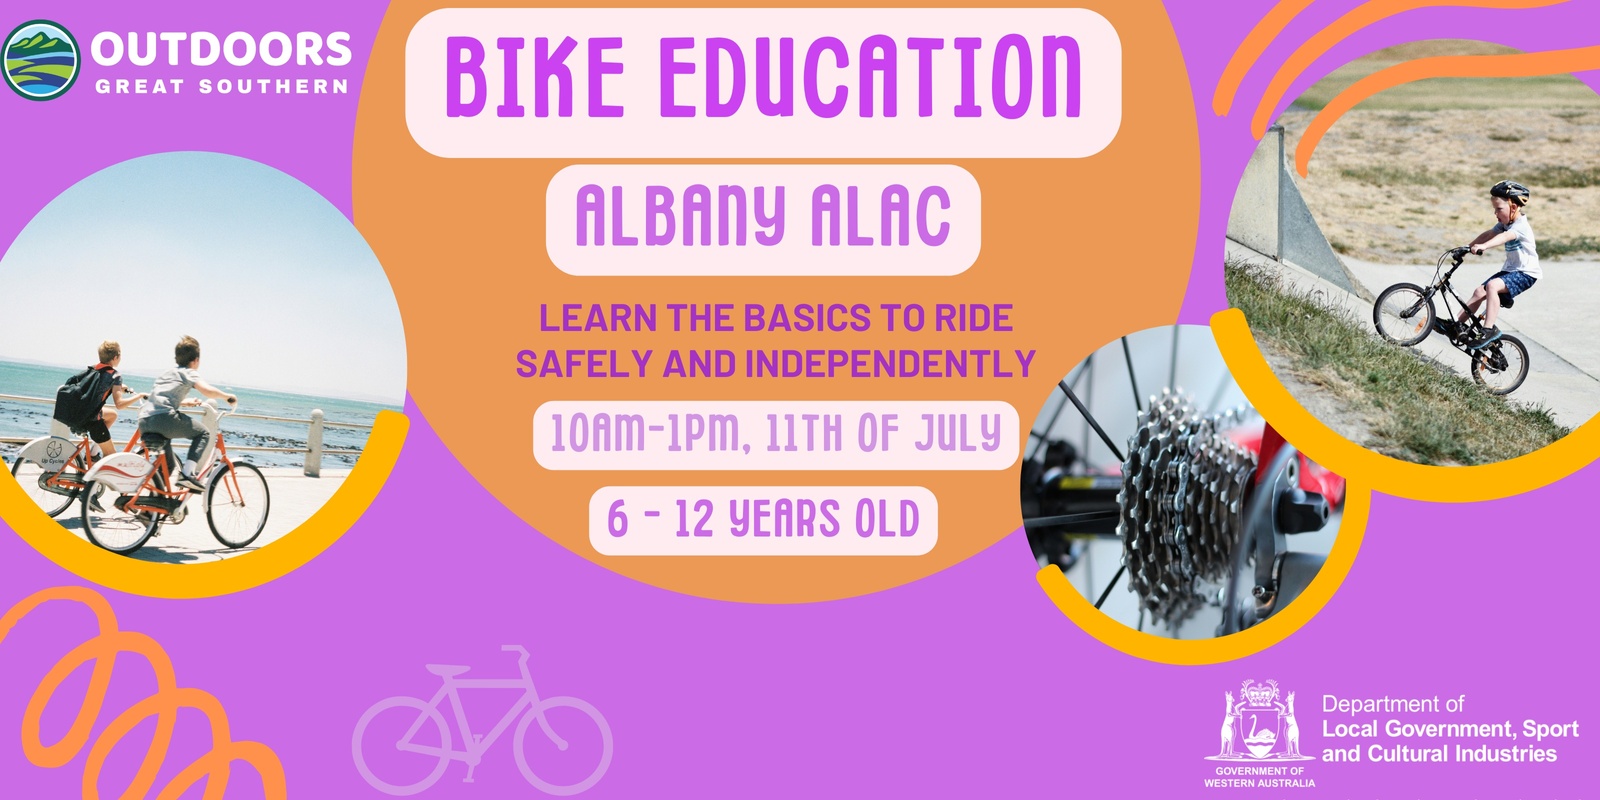 Banner image for Bike Education - 11th July Albany Little Athletics Club, 6 - 12 years